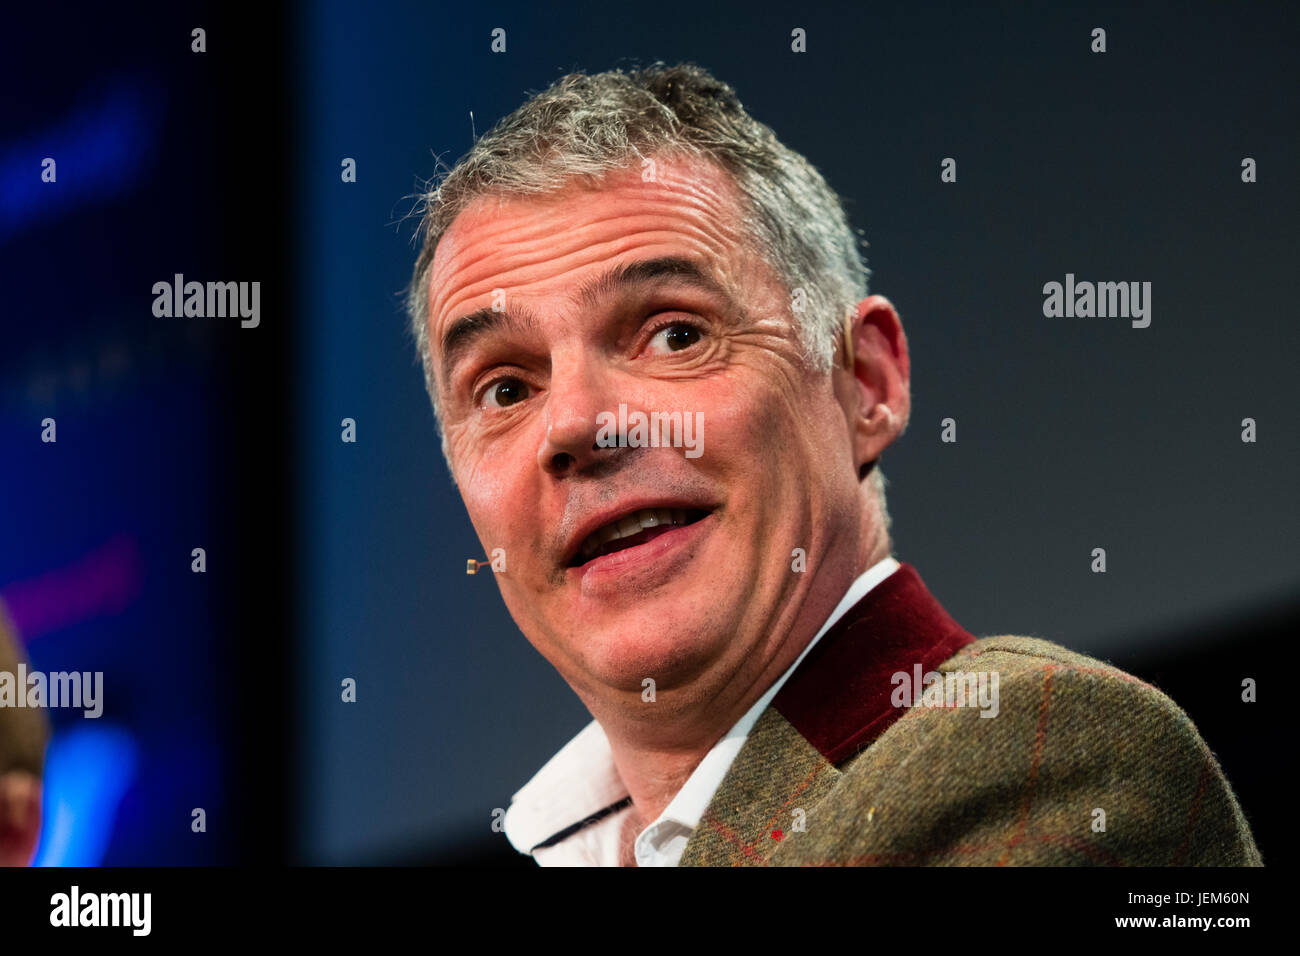 Peter Jukes, English author, screenwriter, playwright, literary critic and blogger.,   at the 2017 Hay Festival of Literature and the Arts, Hay on Wye, Wales UK Stock Photo